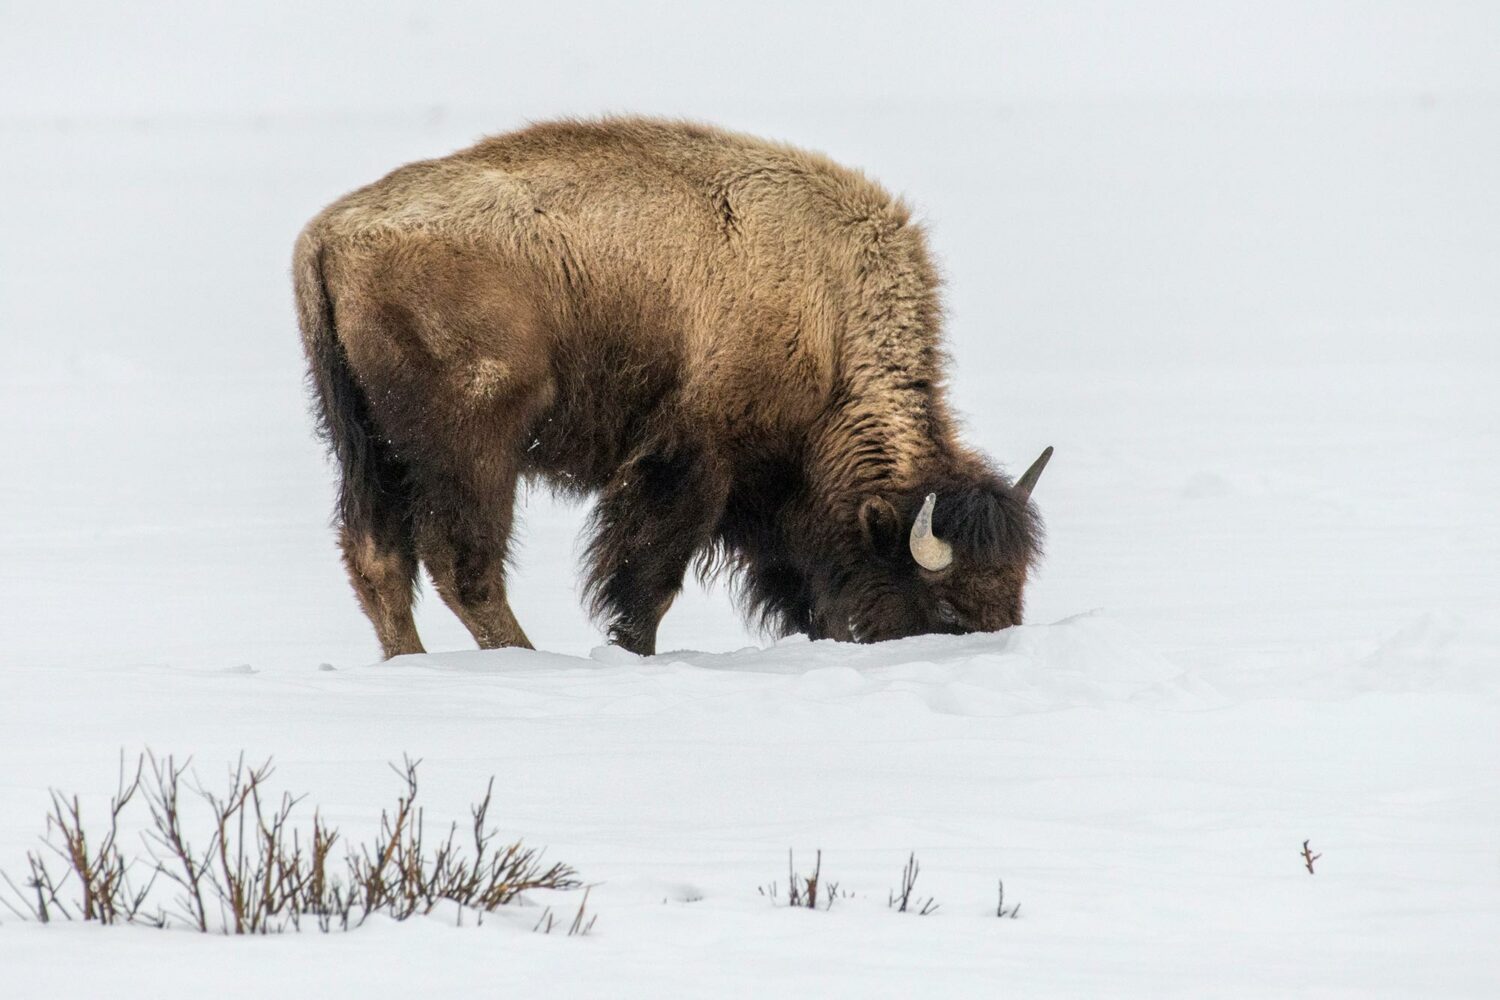 Would Rewilding the Arctic With Mammals Really Slow Climate Change Impact?